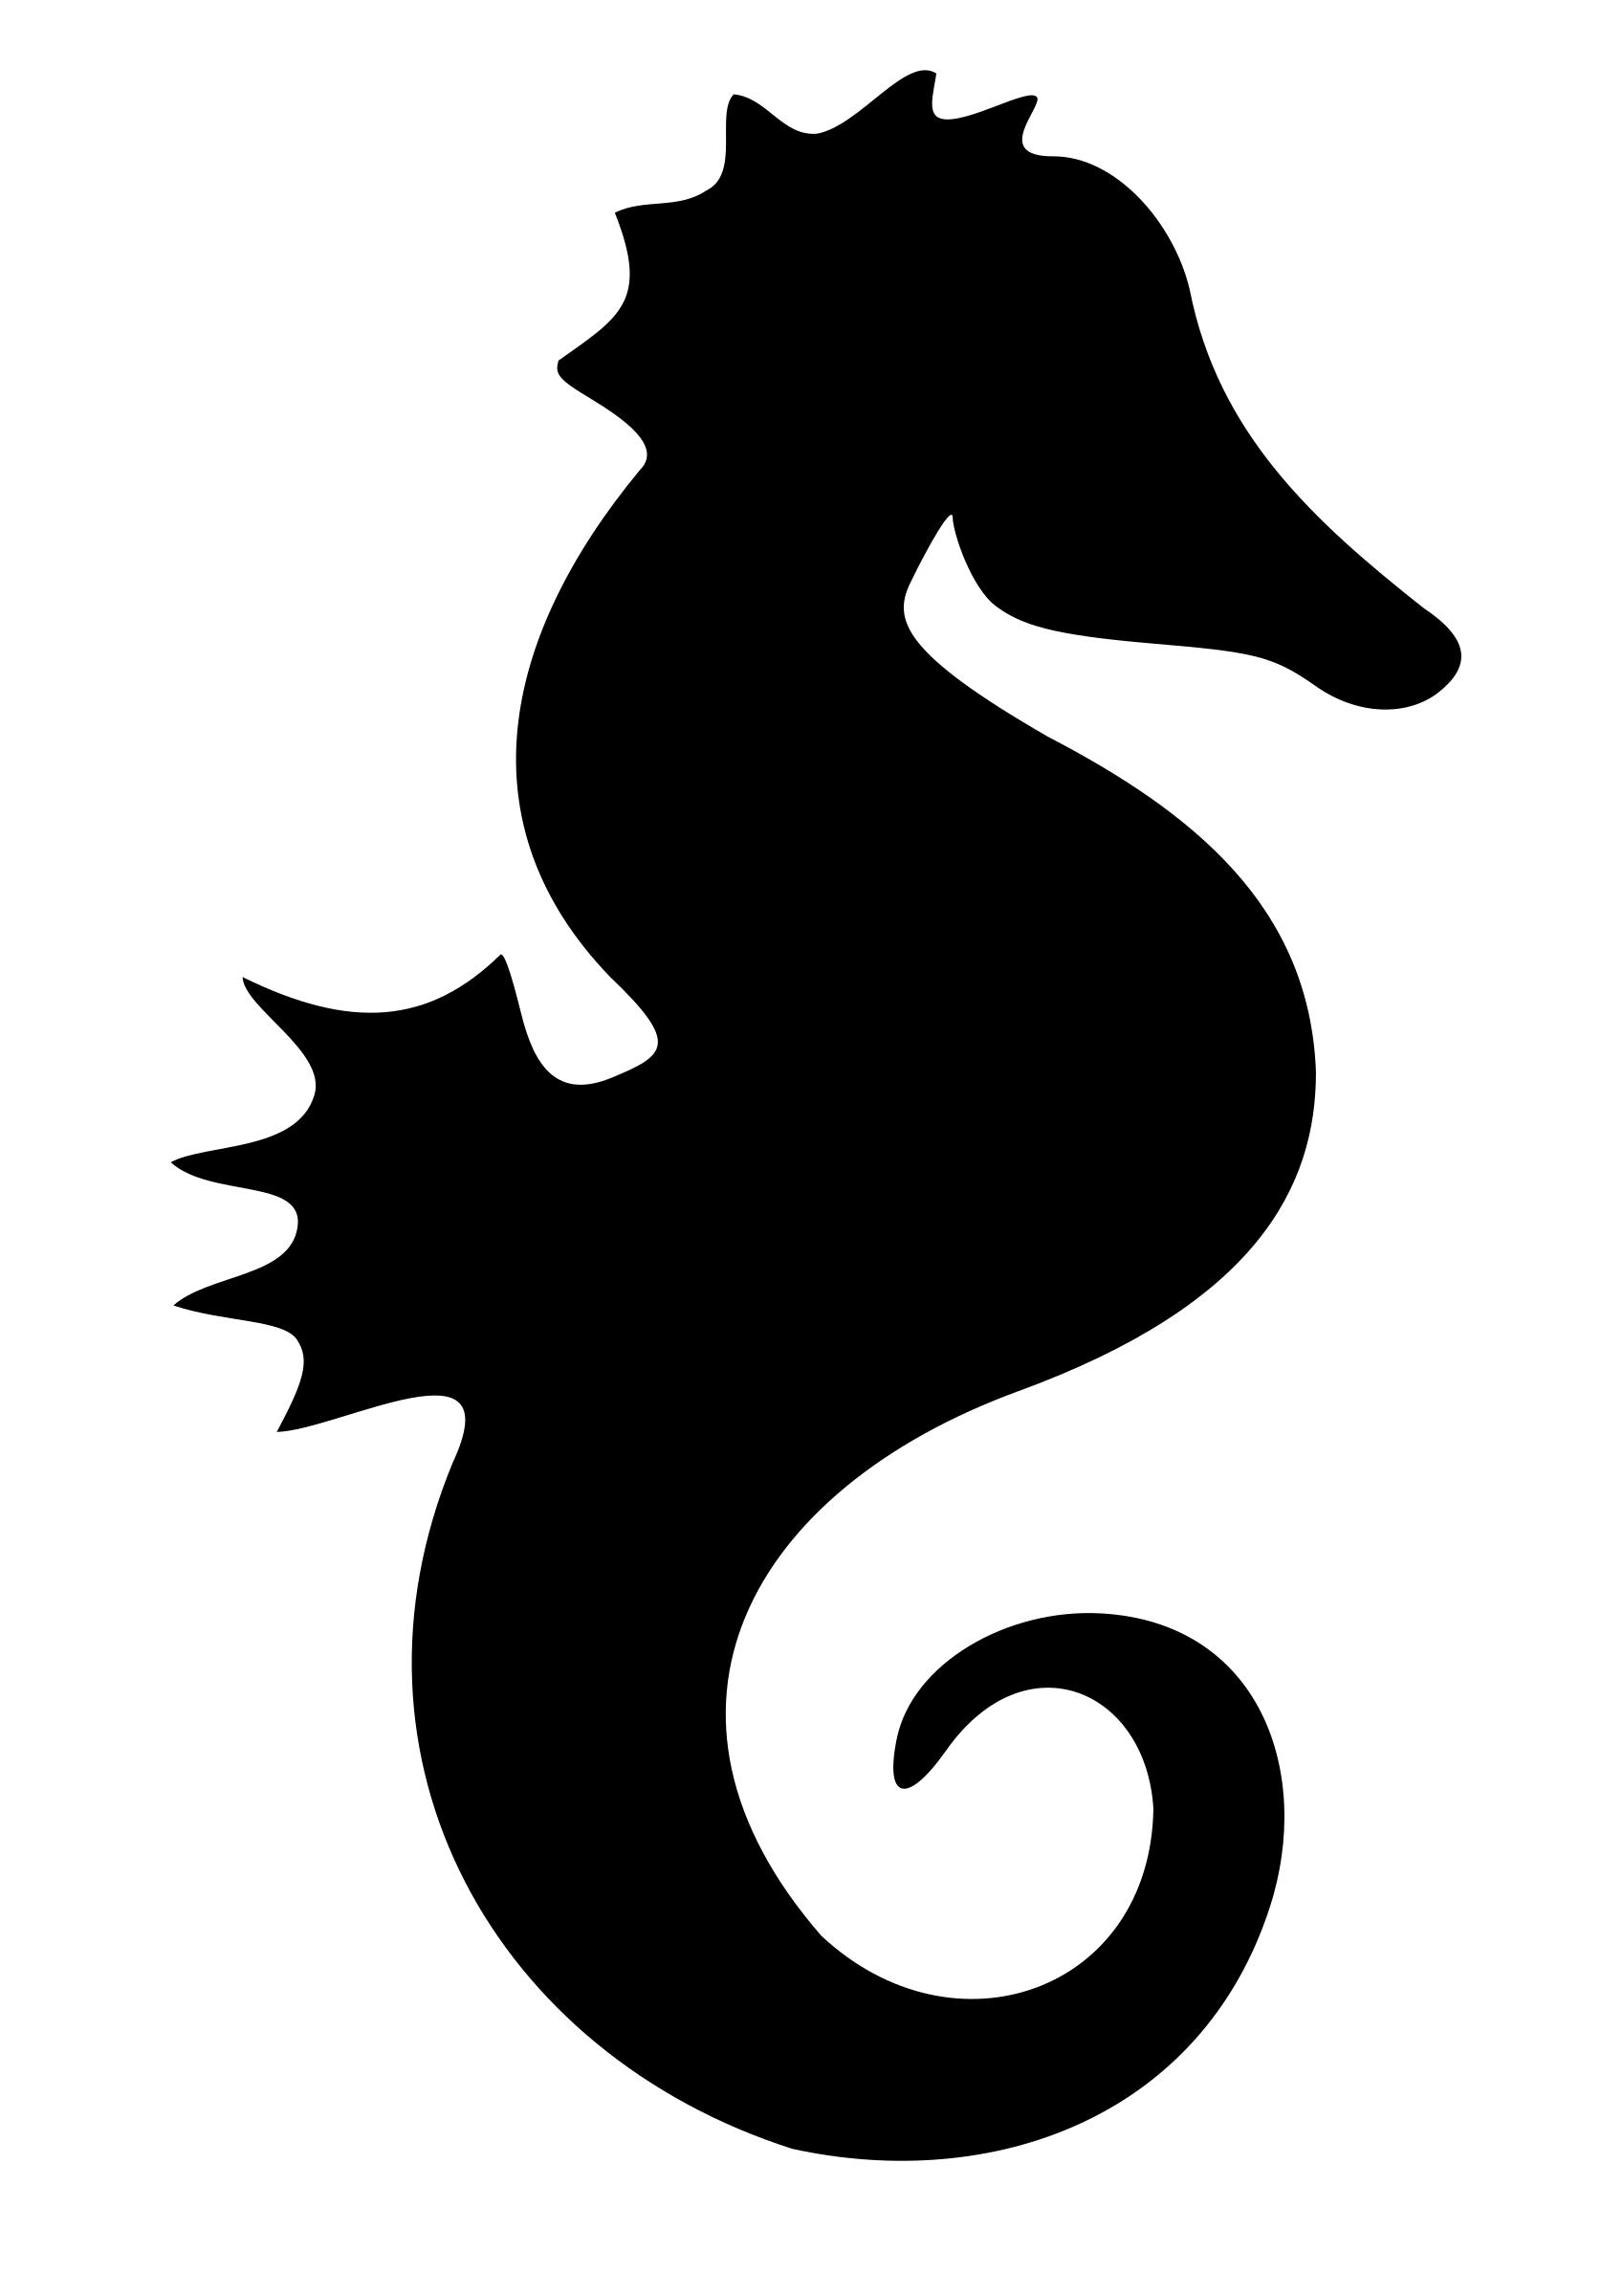 Seahorse Silhouette PNG icons